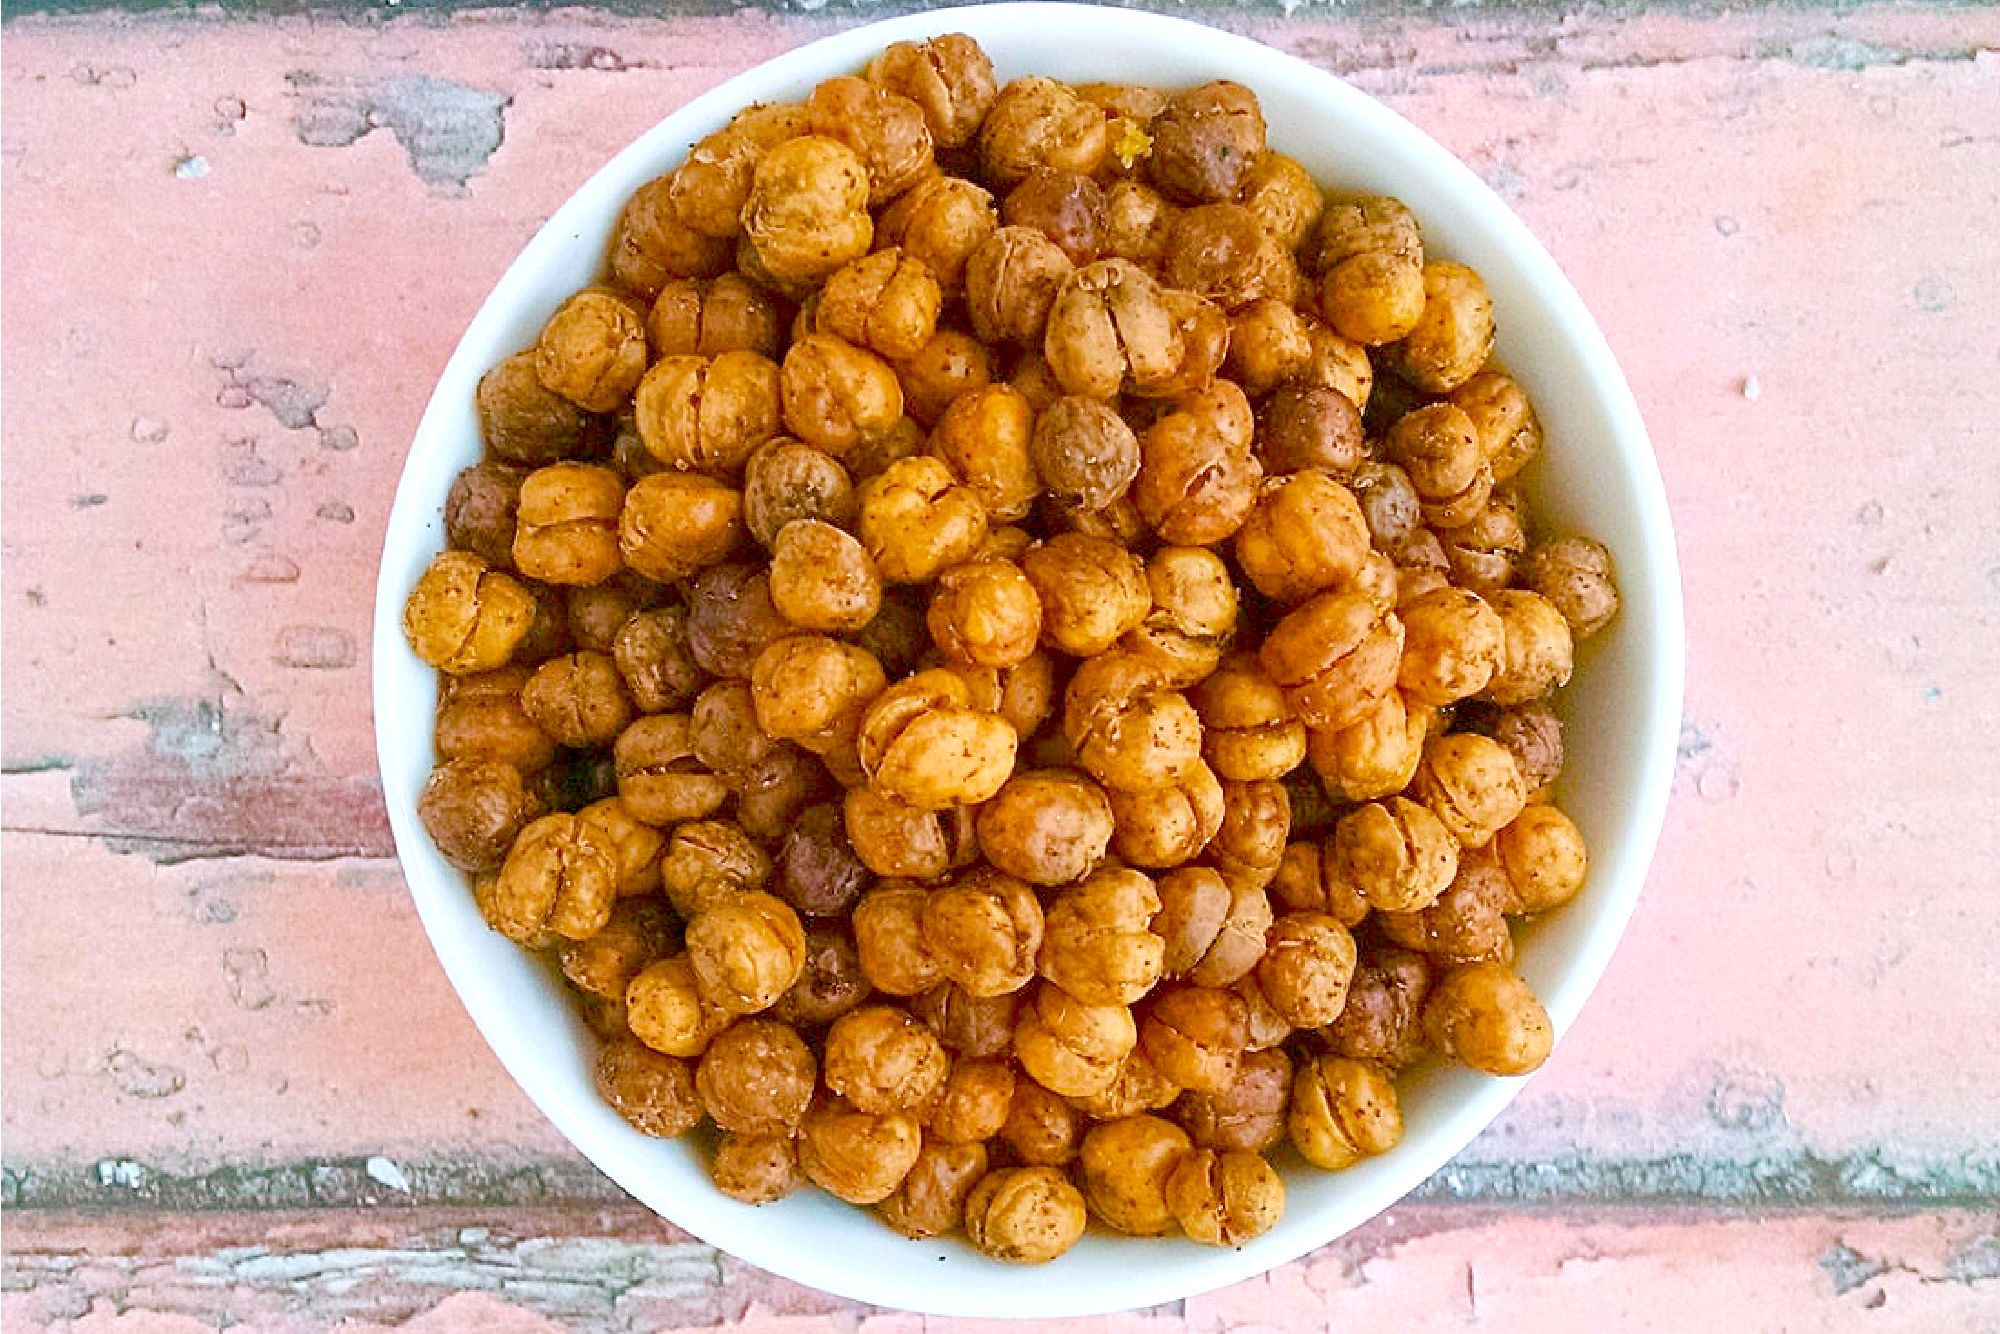 These roasted chickpeas are crunchy, tasty, and healthy! Pizza Roasted Chickpeas are tossed with savory pizza seasoning, Italian seasoning, and some garlic salt to give them that pizza parlor flavor.